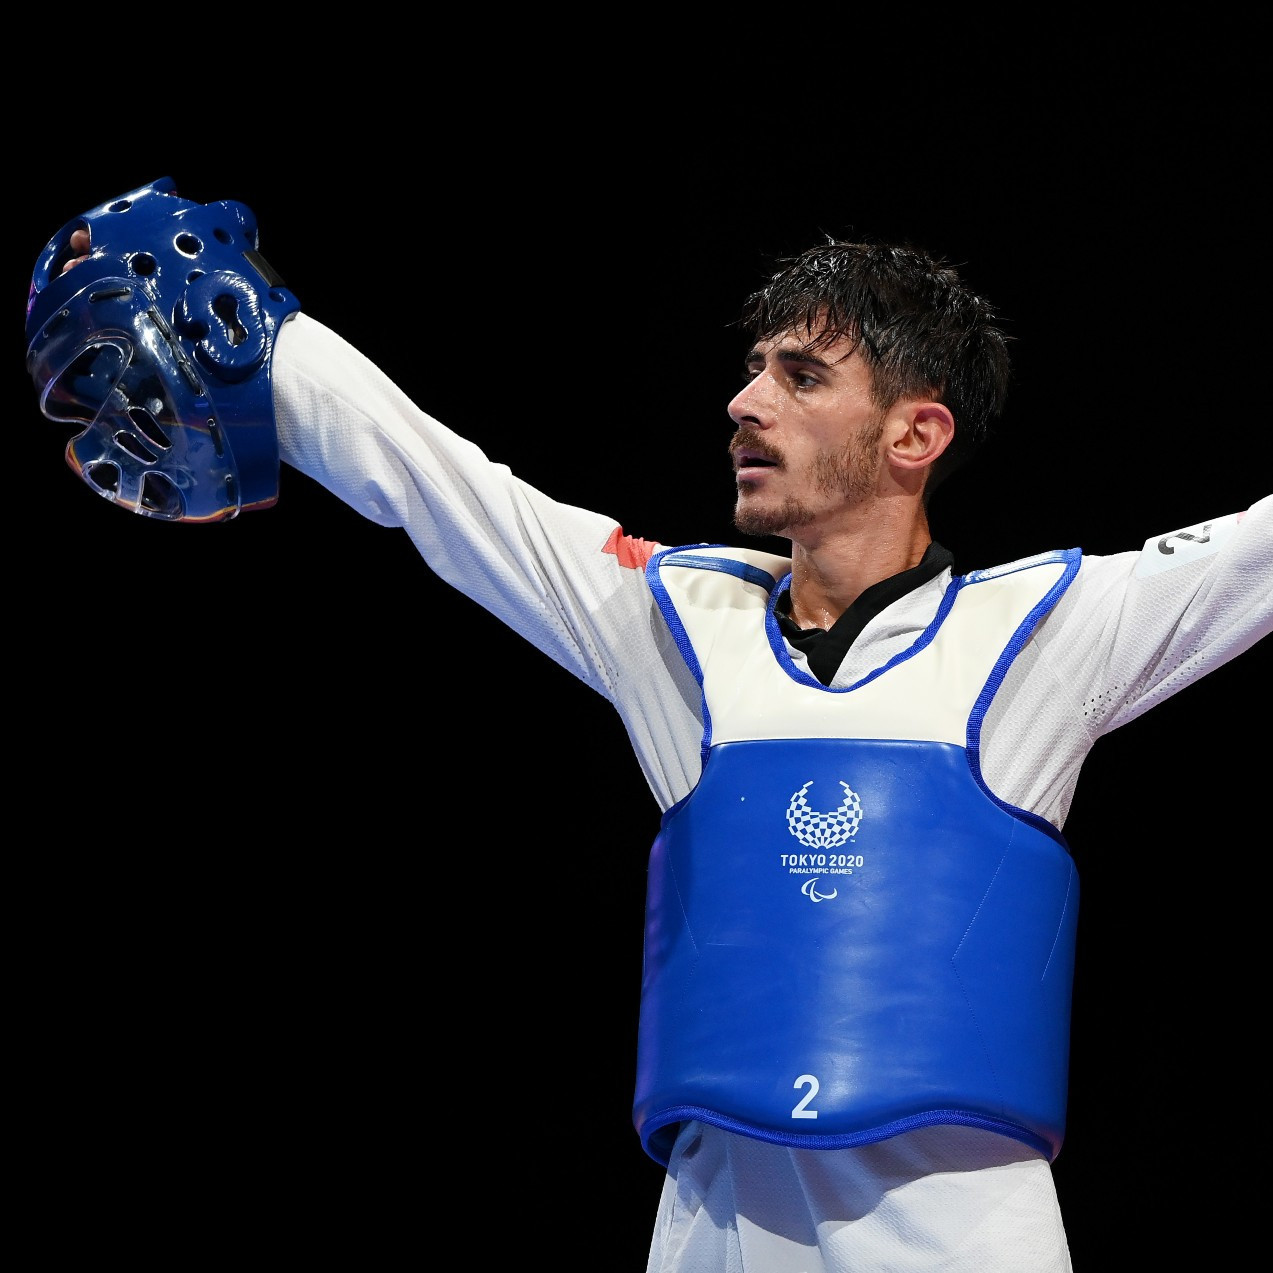 Mahmut Bozteke claimed bronze in the under-61kg at the Tokyo 2020 Paralympics ©Getty Images